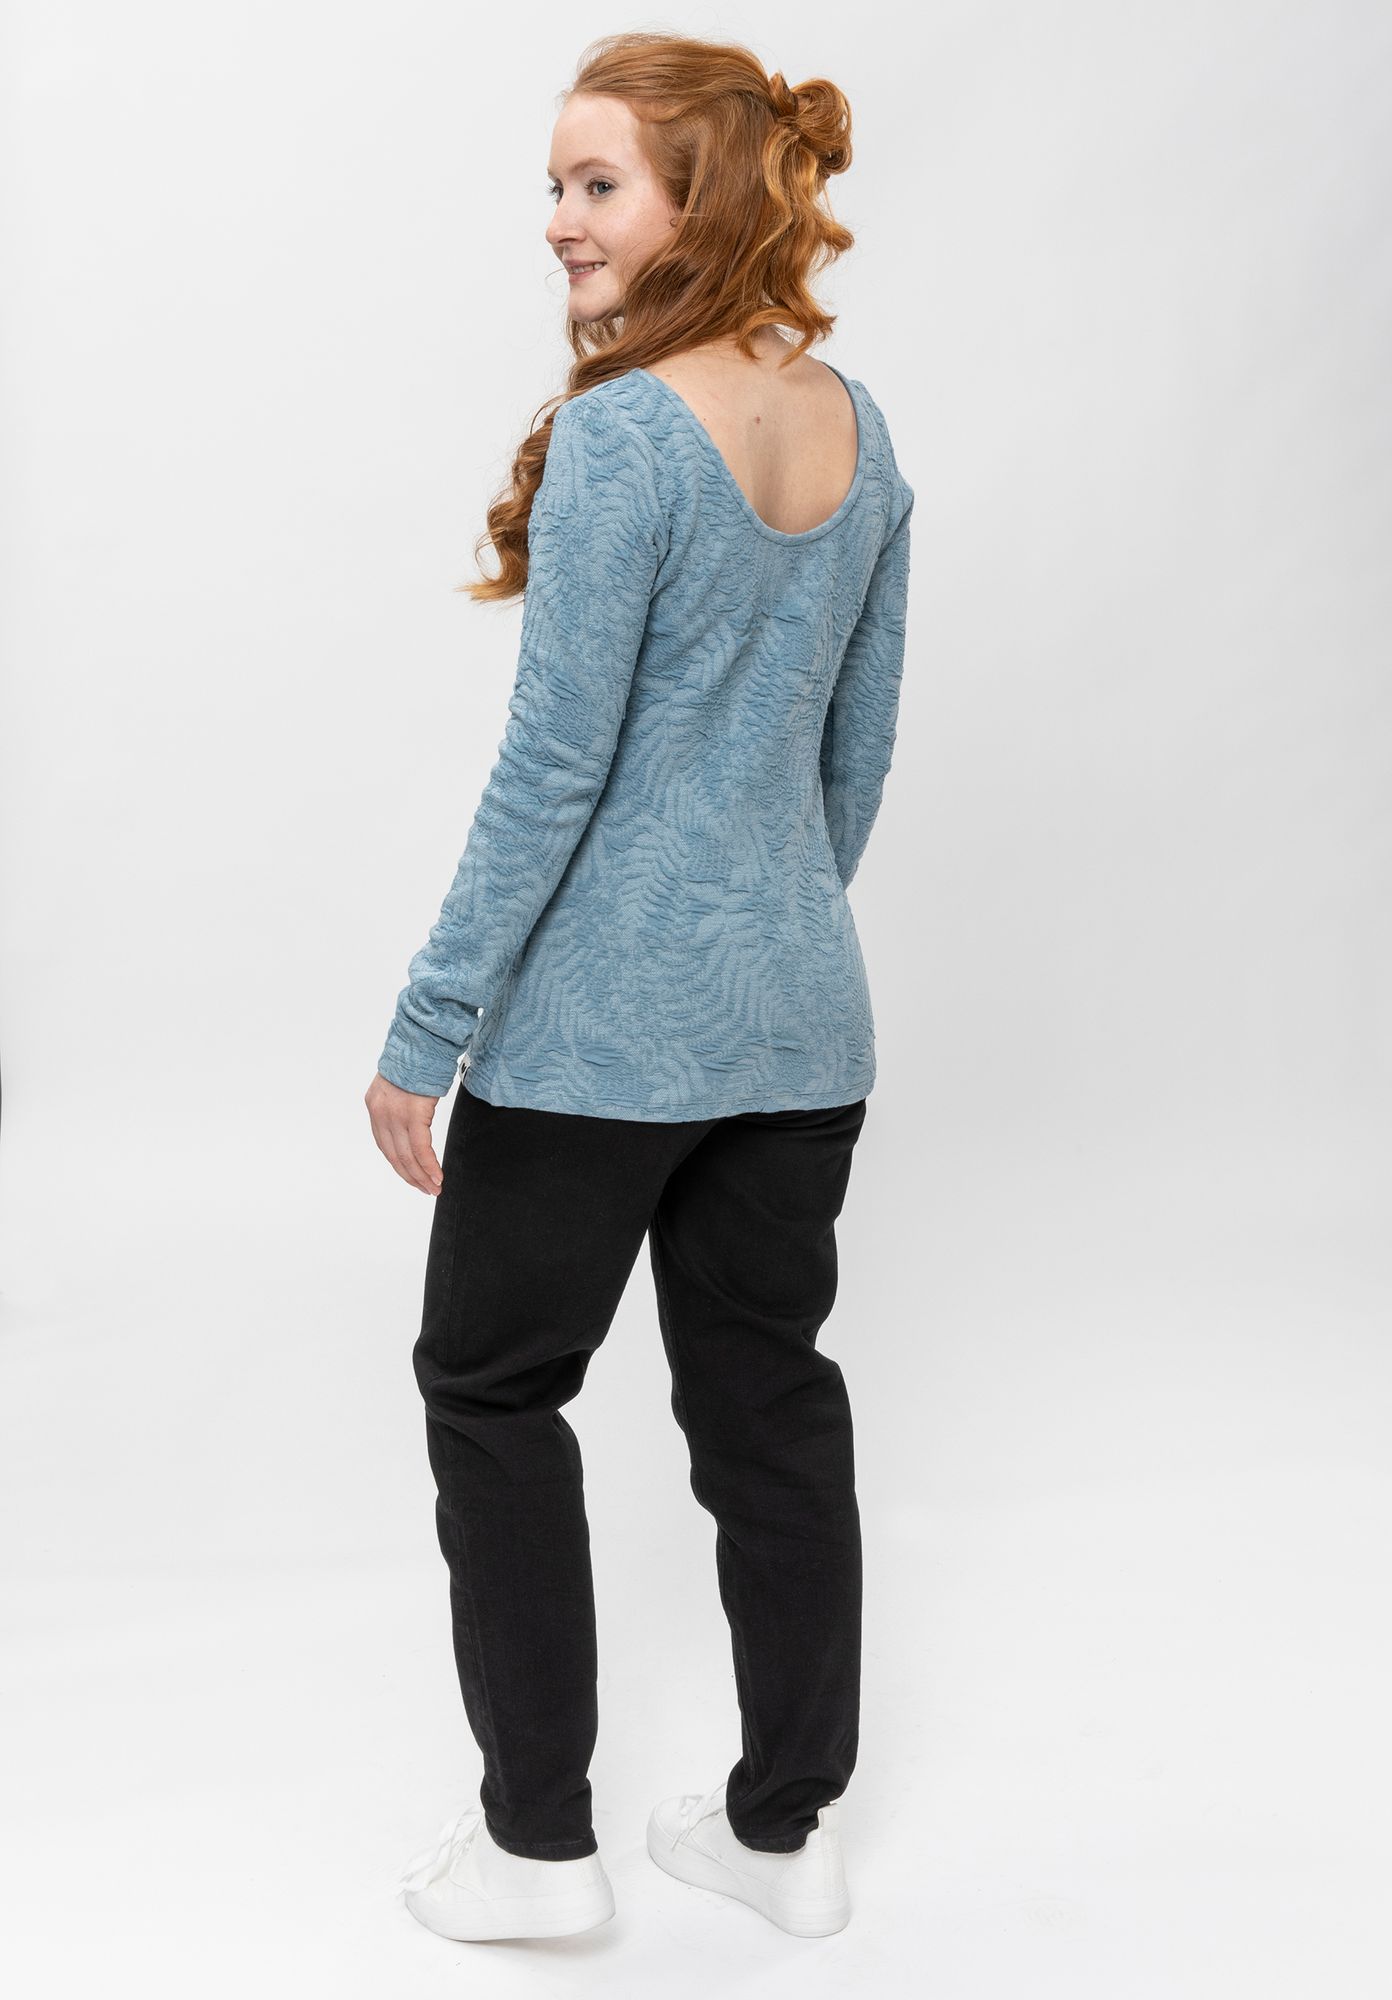 Longsleeve shirt OPPLIA in blue by LOVJOI made of organic cotton (ST)